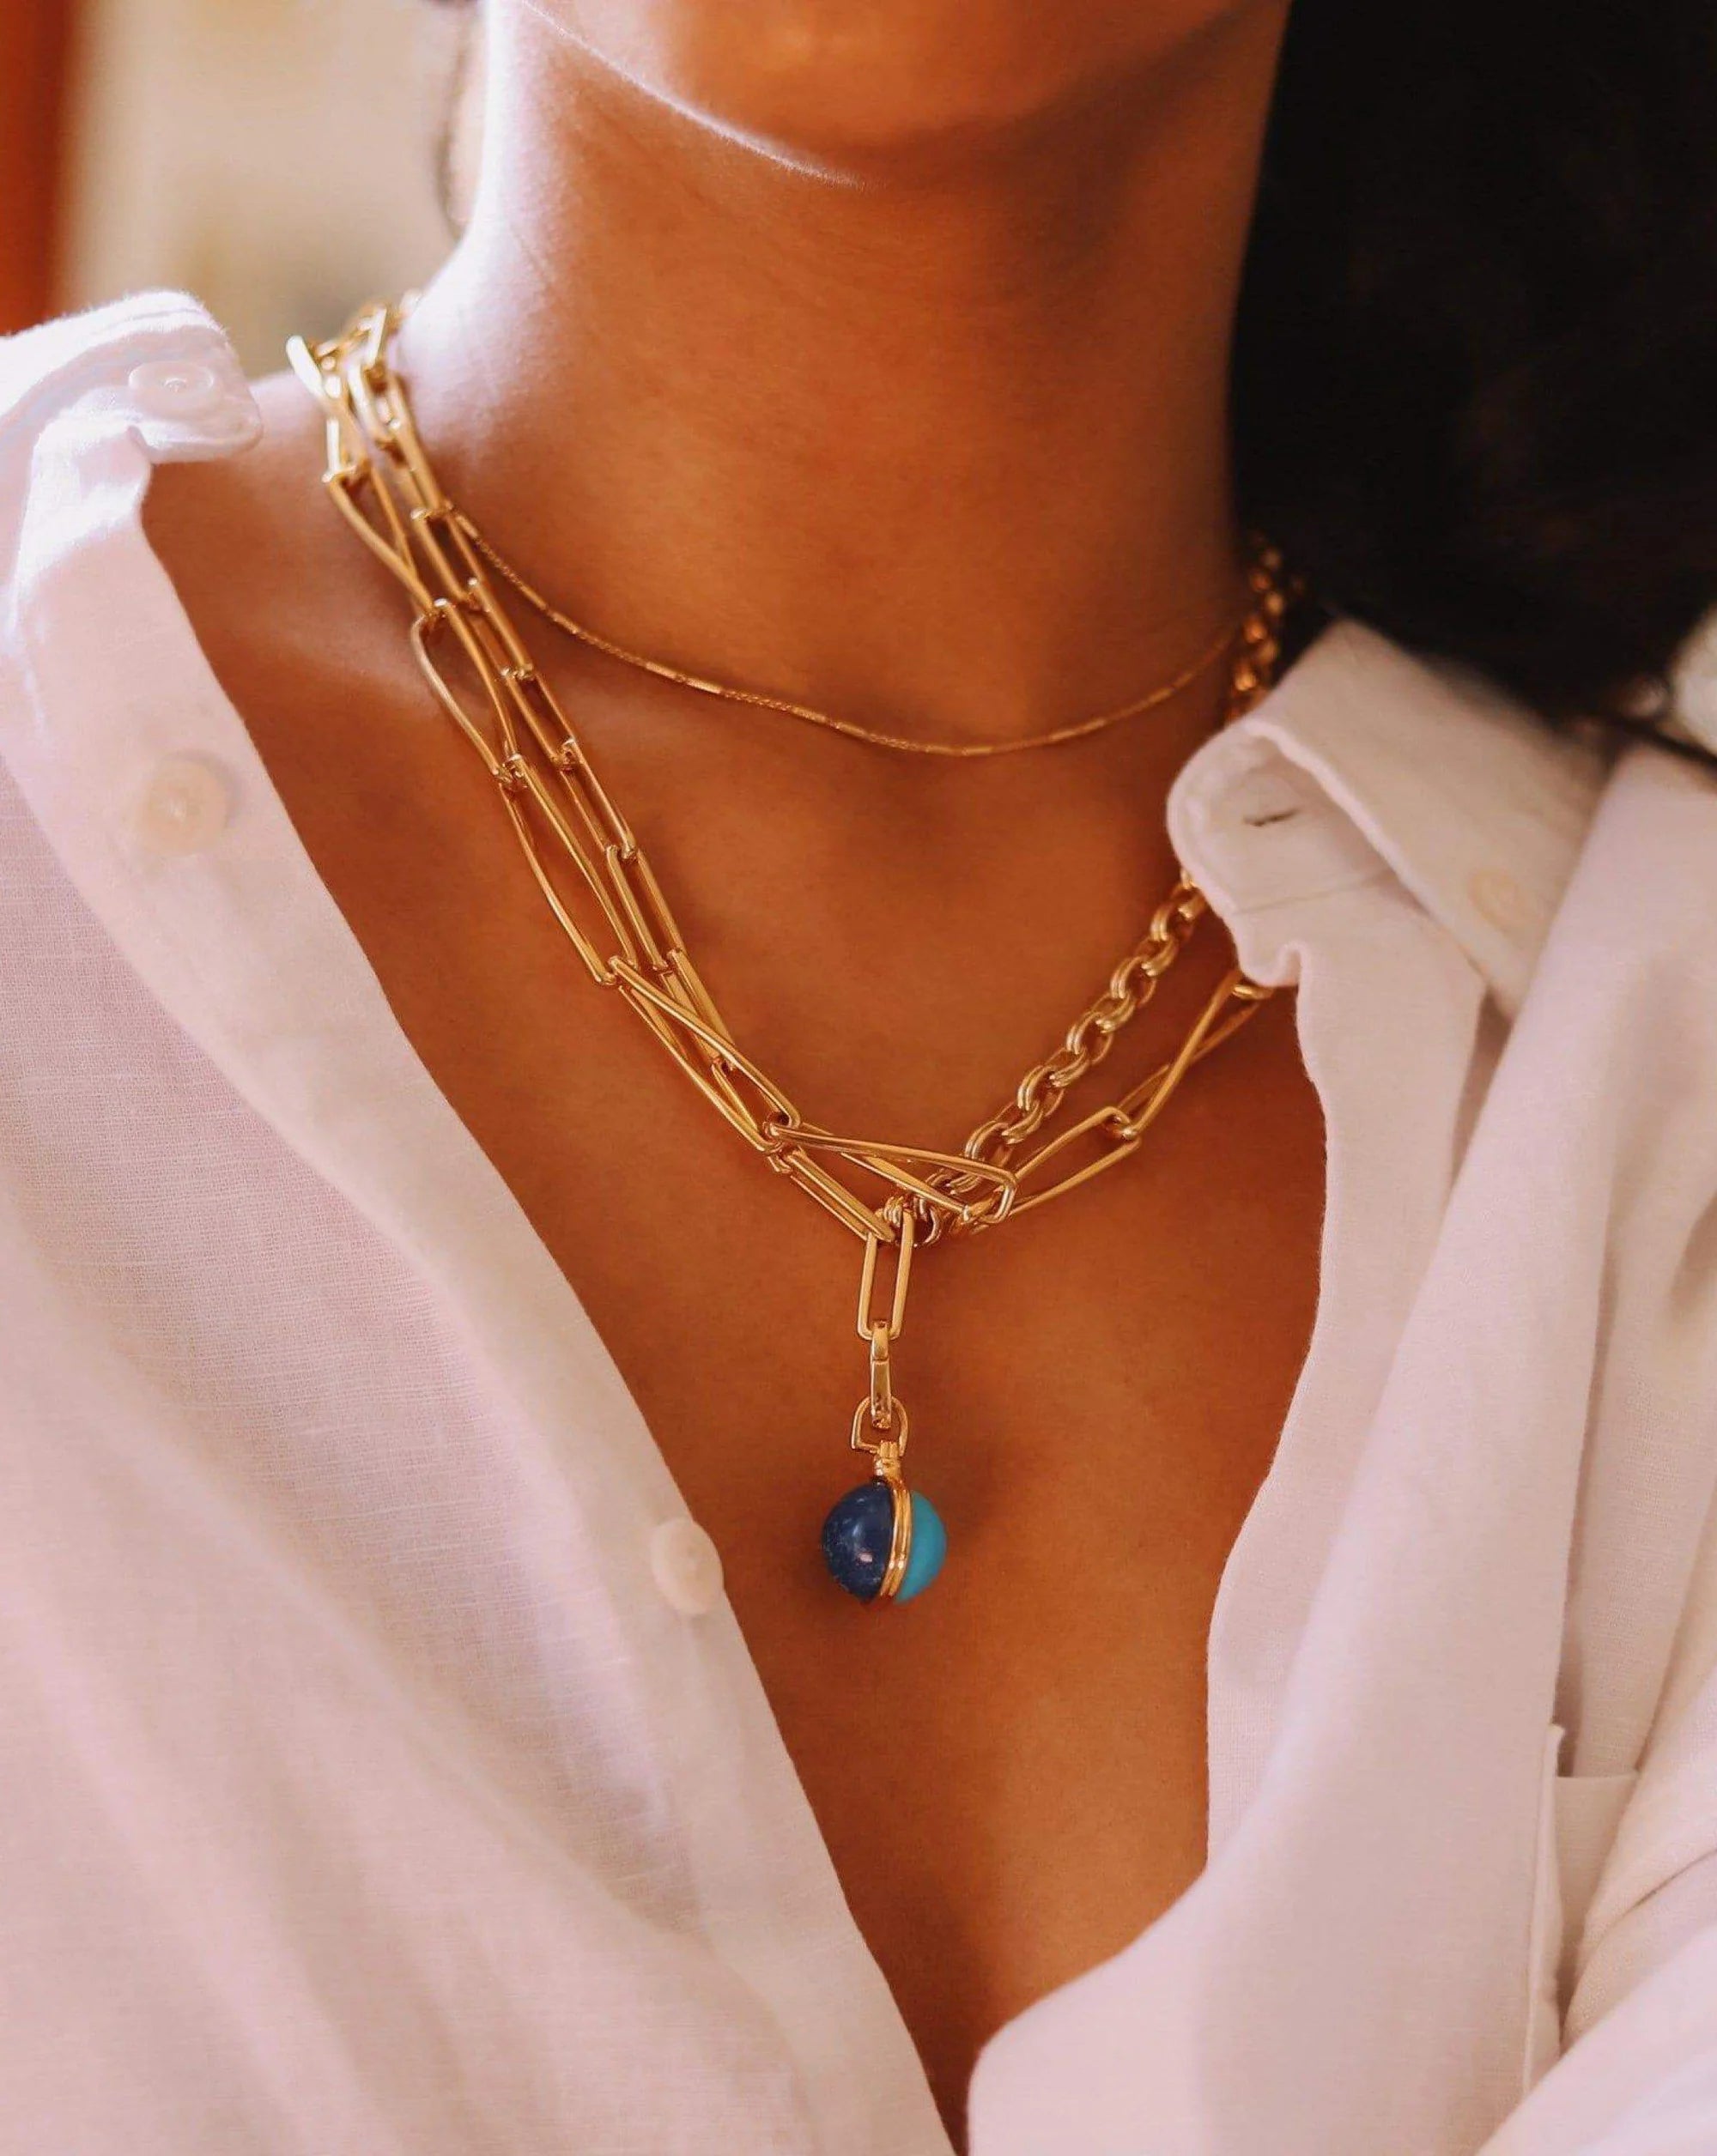 Deconstructed Axiom Sphere Chain Necklace | 18ct Gold Plated / Lapis & Turquoise Necklaces Missoma 